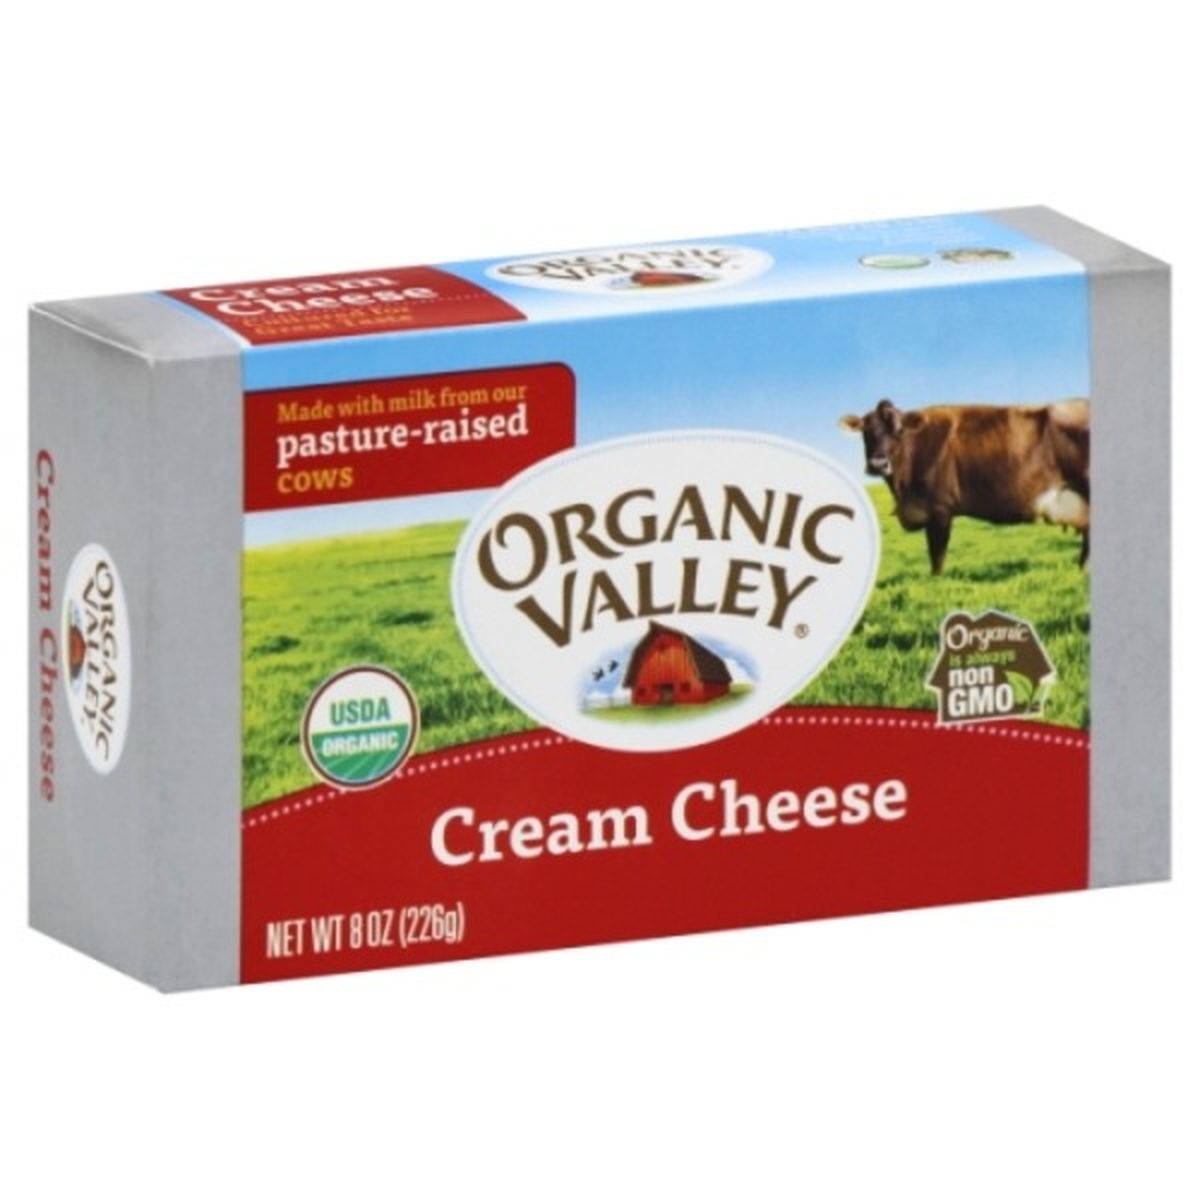 Calories in Organic Valley Cream Cheese